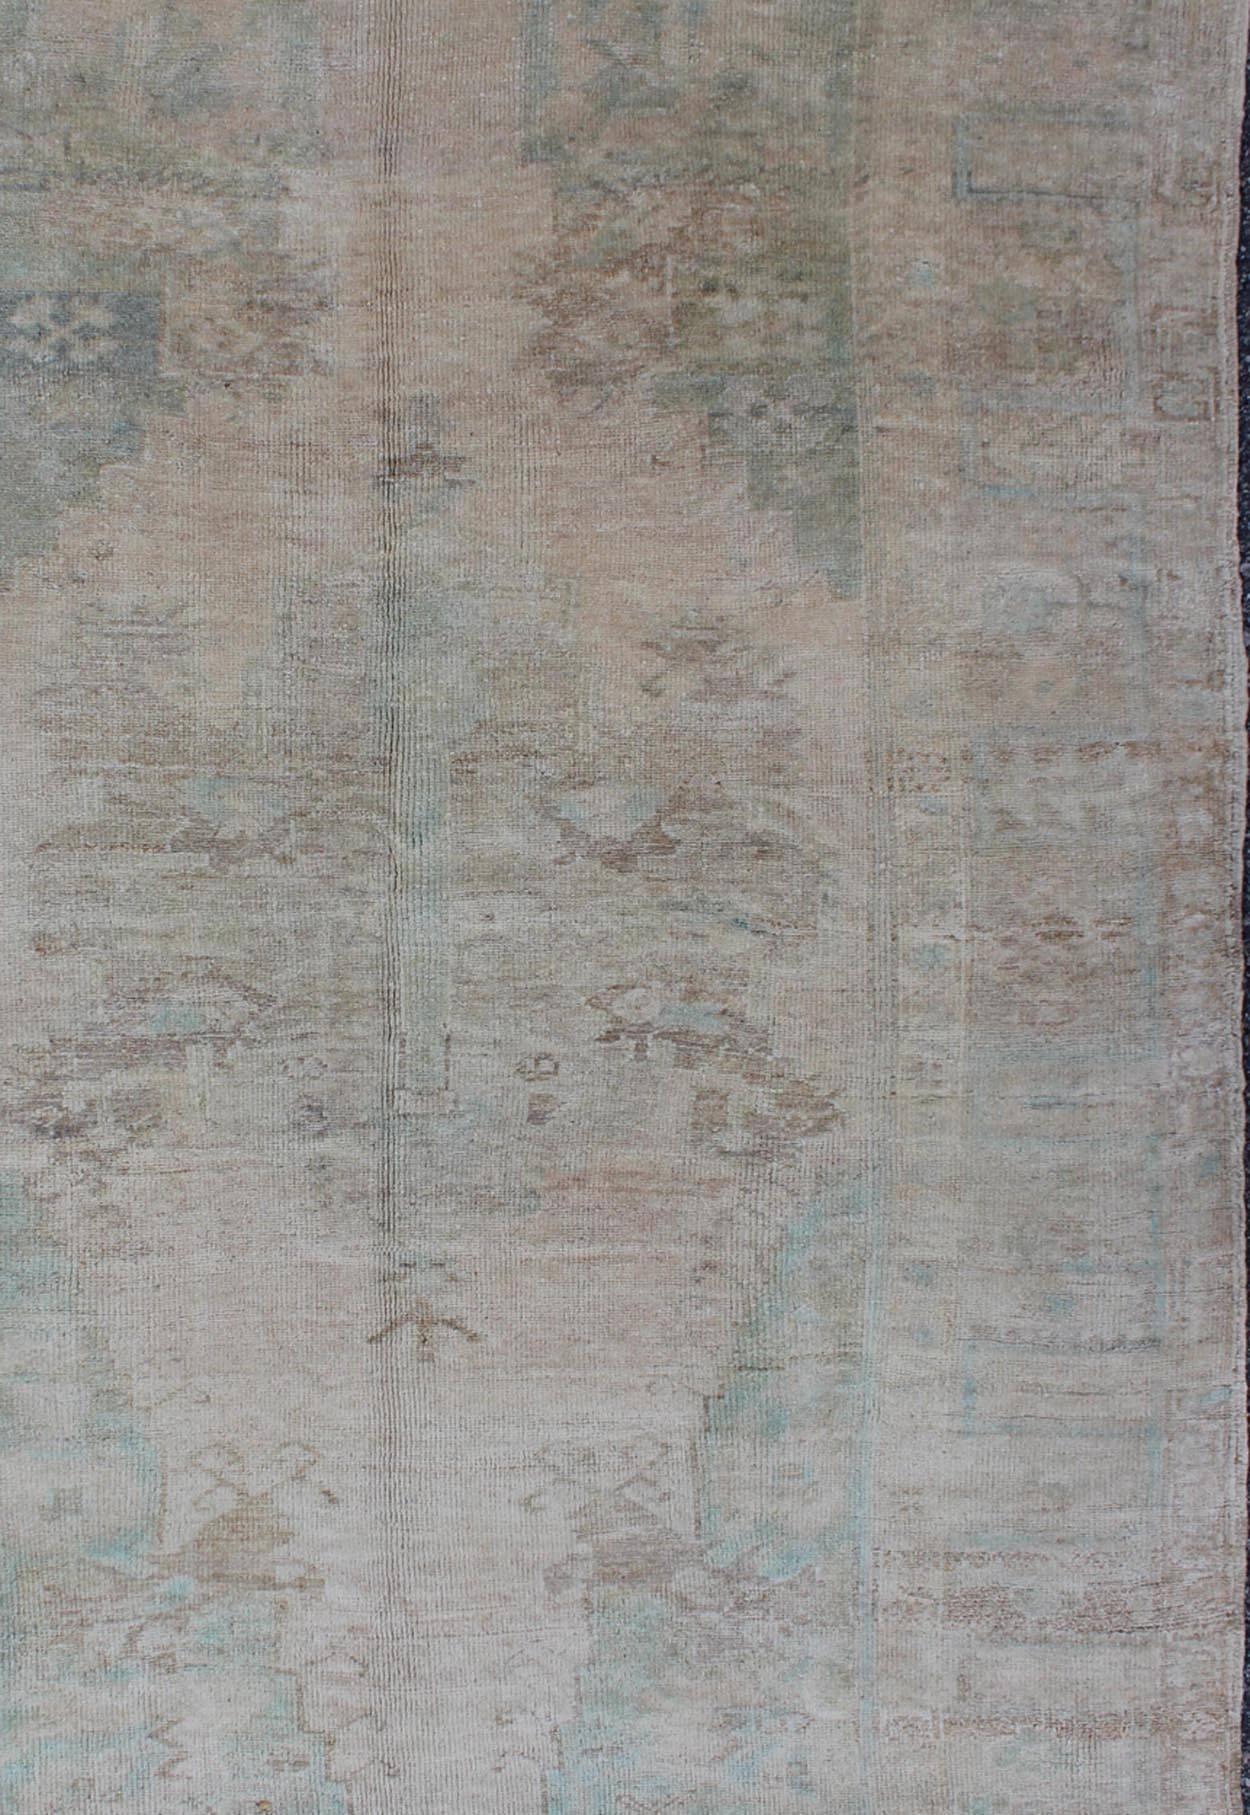 Hand-Knotted Pale Color Vintage Turkish Oushak Rug With Layered Medallion in Teal, Taupe